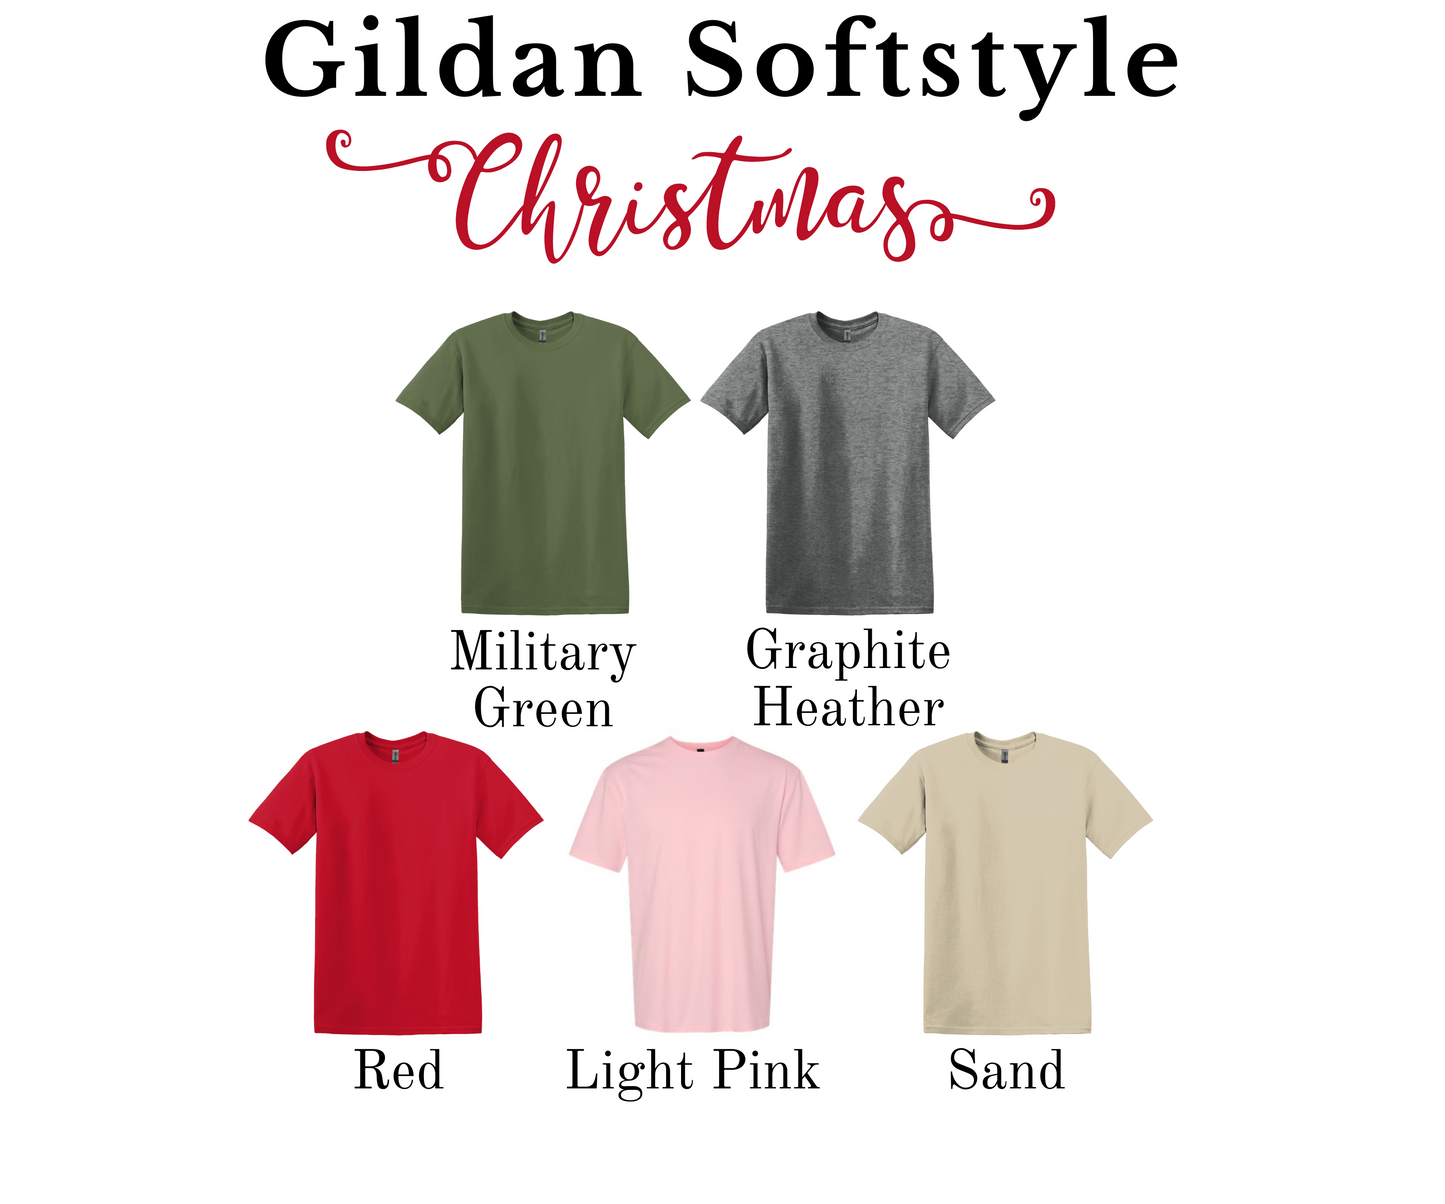 At The Soccer Field is Where I Spend Most of my Days Gildan Softstyle T-shirt or Sweatshirt